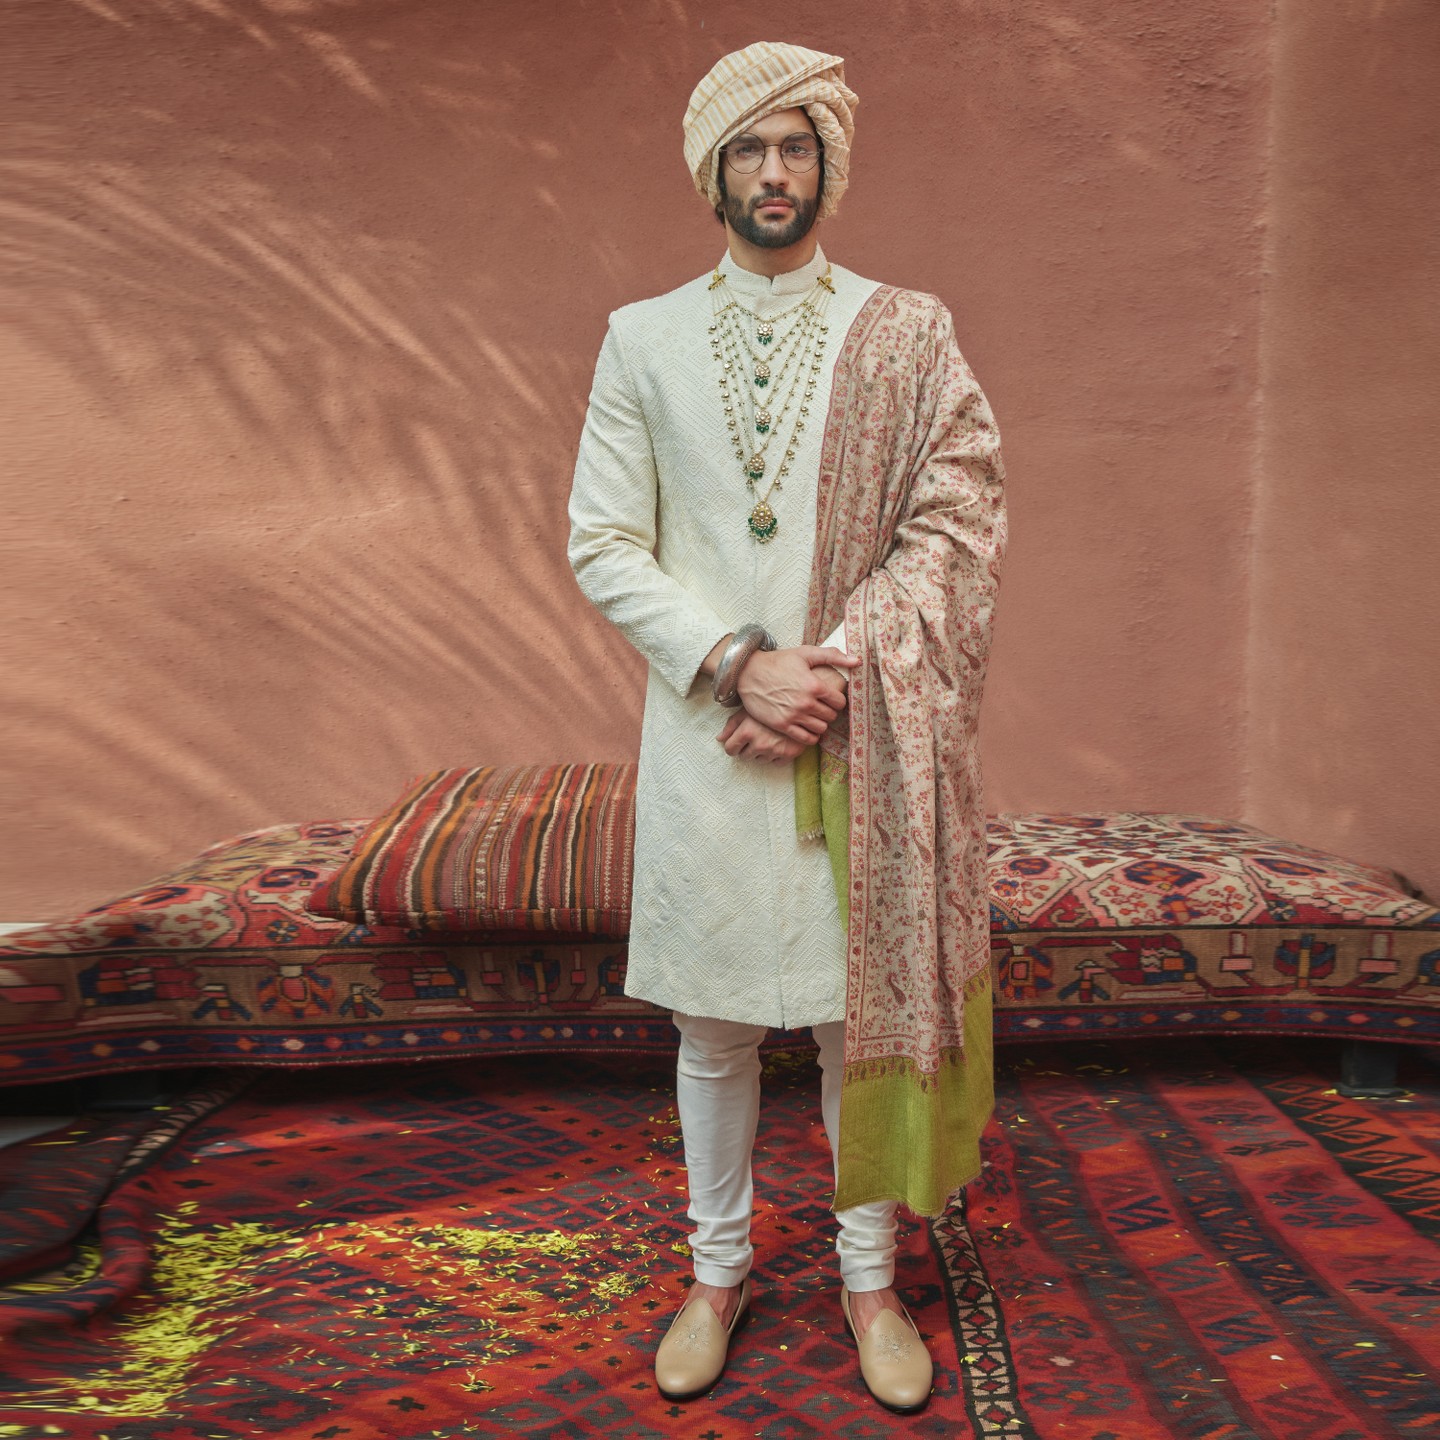 JADE By MK’s ‘Rangrez’ Is A Sonnet For A Refreshing Summer Wedding